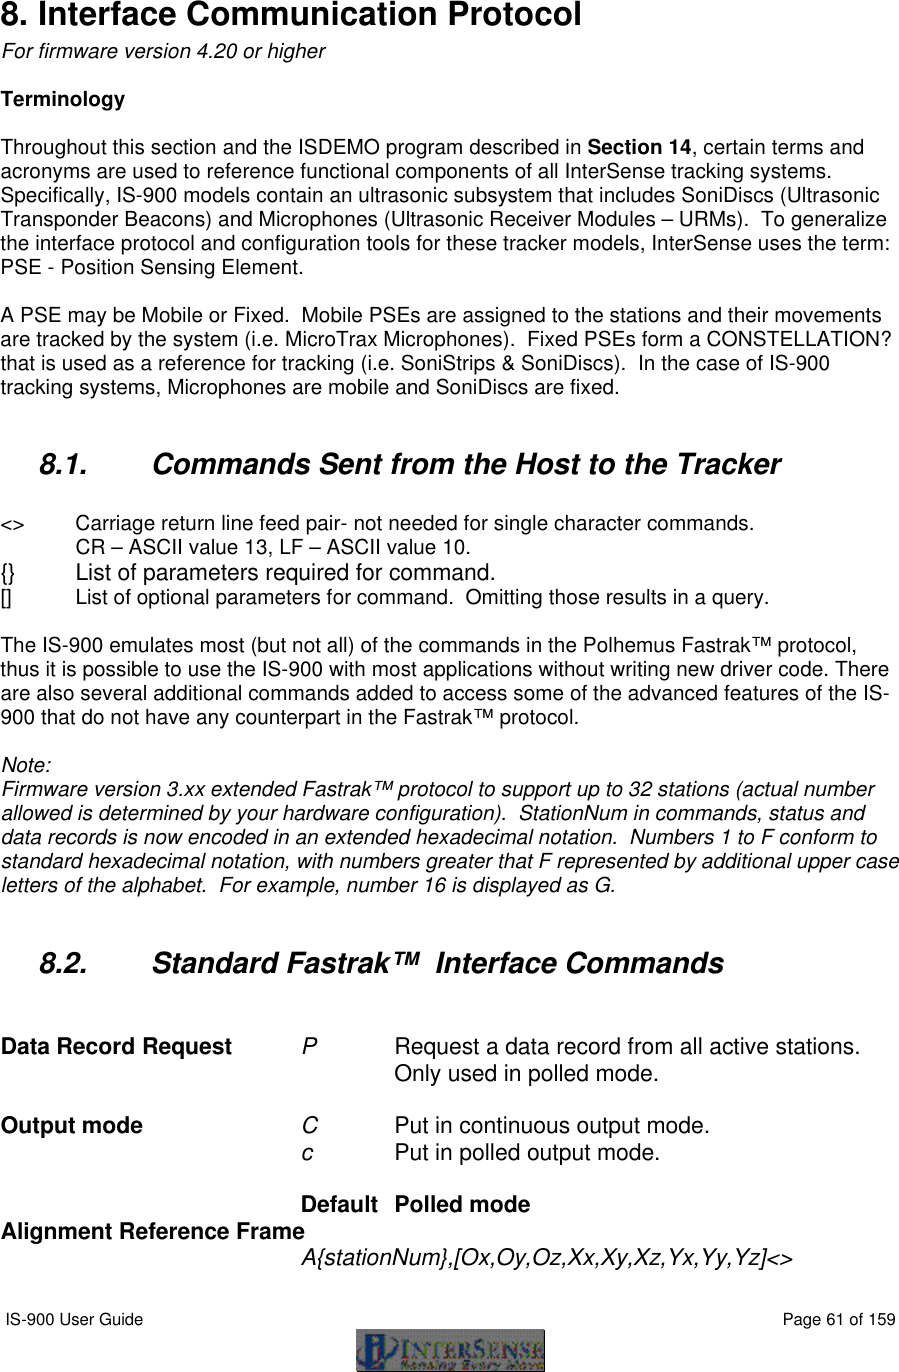  IS-900 User Guide                                                                                                                                          Page 61 of 159   8. Interface Communication Protocol For firmware version 4.20 or higher  Terminology  Throughout this section and the ISDEMO program described in Section 14, certain terms and acronyms are used to reference functional components of all InterSense tracking systems.  Specifically, IS-900 models contain an ultrasonic subsystem that includes SoniDiscs (Ultrasonic Transponder Beacons) and Microphones (Ultrasonic Receiver Modules – URMs).  To generalize the interface protocol and configuration tools for these tracker models, InterSense uses the term: PSE - Position Sensing Element.  A PSE may be Mobile or Fixed.  Mobile PSEs are assigned to the stations and their movements are tracked by the system (i.e. MicroTrax Microphones).  Fixed PSEs form a CONSTELLATION? that is used as a reference for tracking (i.e. SoniStrips &amp; SoniDiscs).  In the case of IS-900 tracking systems, Microphones are mobile and SoniDiscs are fixed.  8.1. Commands Sent from the Host to the Tracker  &lt;&gt;  Carriage return line feed pair- not needed for single character commands. CR – ASCII value 13, LF – ASCII value 10. {}   List of parameters required for command. []    List of optional parameters for command.  Omitting those results in a query.  The IS-900 emulates most (but not all) of the commands in the Polhemus Fastrak™ protocol, thus it is possible to use the IS-900 with most applications without writing new driver code. There are also several additional commands added to access some of the advanced features of the IS-900 that do not have any counterpart in the Fastrak™ protocol.  Note: Firmware version 3.xx extended Fastrak™ protocol to support up to 32 stations (actual number allowed is determined by your hardware configuration).  StationNum in commands, status and data records is now encoded in an extended hexadecimal notation.  Numbers 1 to F conform to standard hexadecimal notation, with numbers greater that F represented by additional upper case letters of the alphabet.  For example, number 16 is displayed as G.  8.2. Standard Fastrak™  Interface Commands   Data Record Request P     Request a data record from all active stations.      Only used in polled mode.  Output mode C     Put in continuous output mode. c      Put in polled output mode.     Default  Polled mode Alignment Reference Frame A{stationNum},[Ox,Oy,Oz,Xx,Xy,Xz,Yx,Yy,Yz]&lt;&gt;  